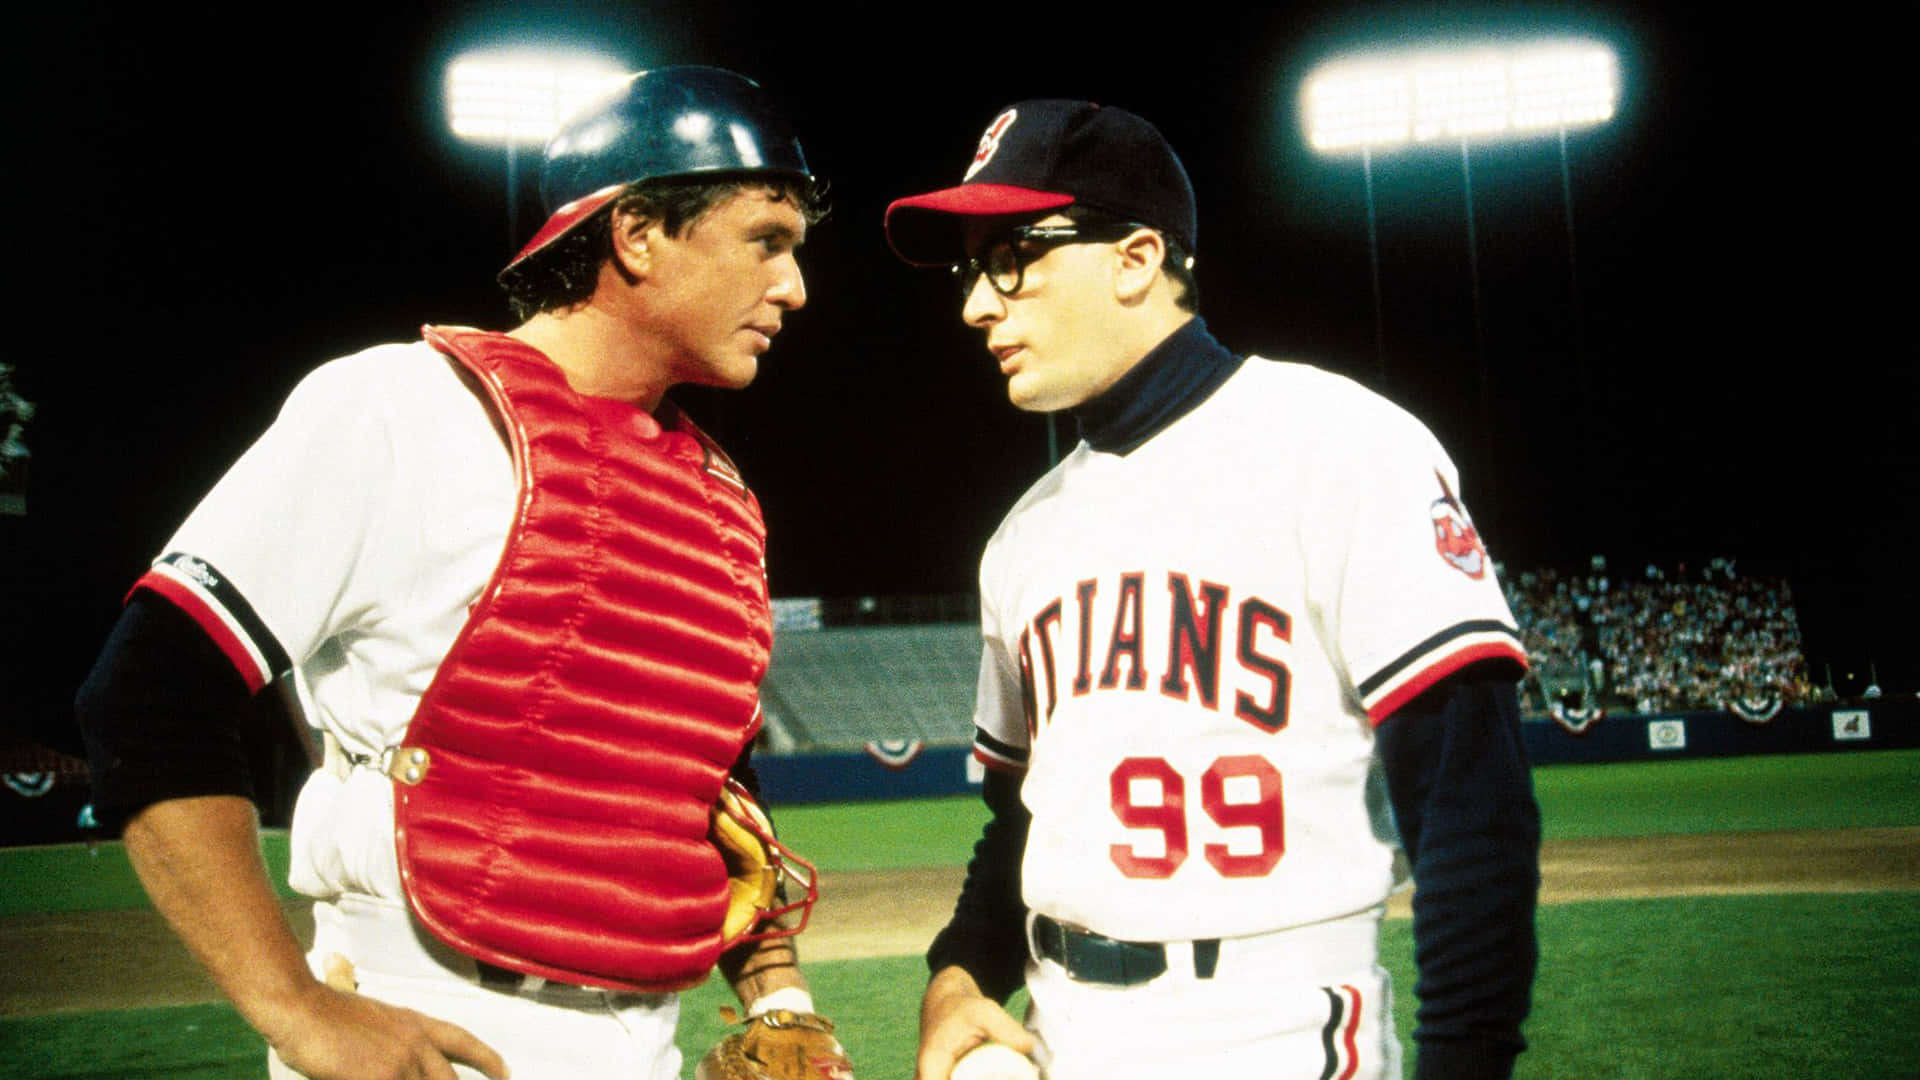 Download Major League Movie Cast on the Field Wallpaper